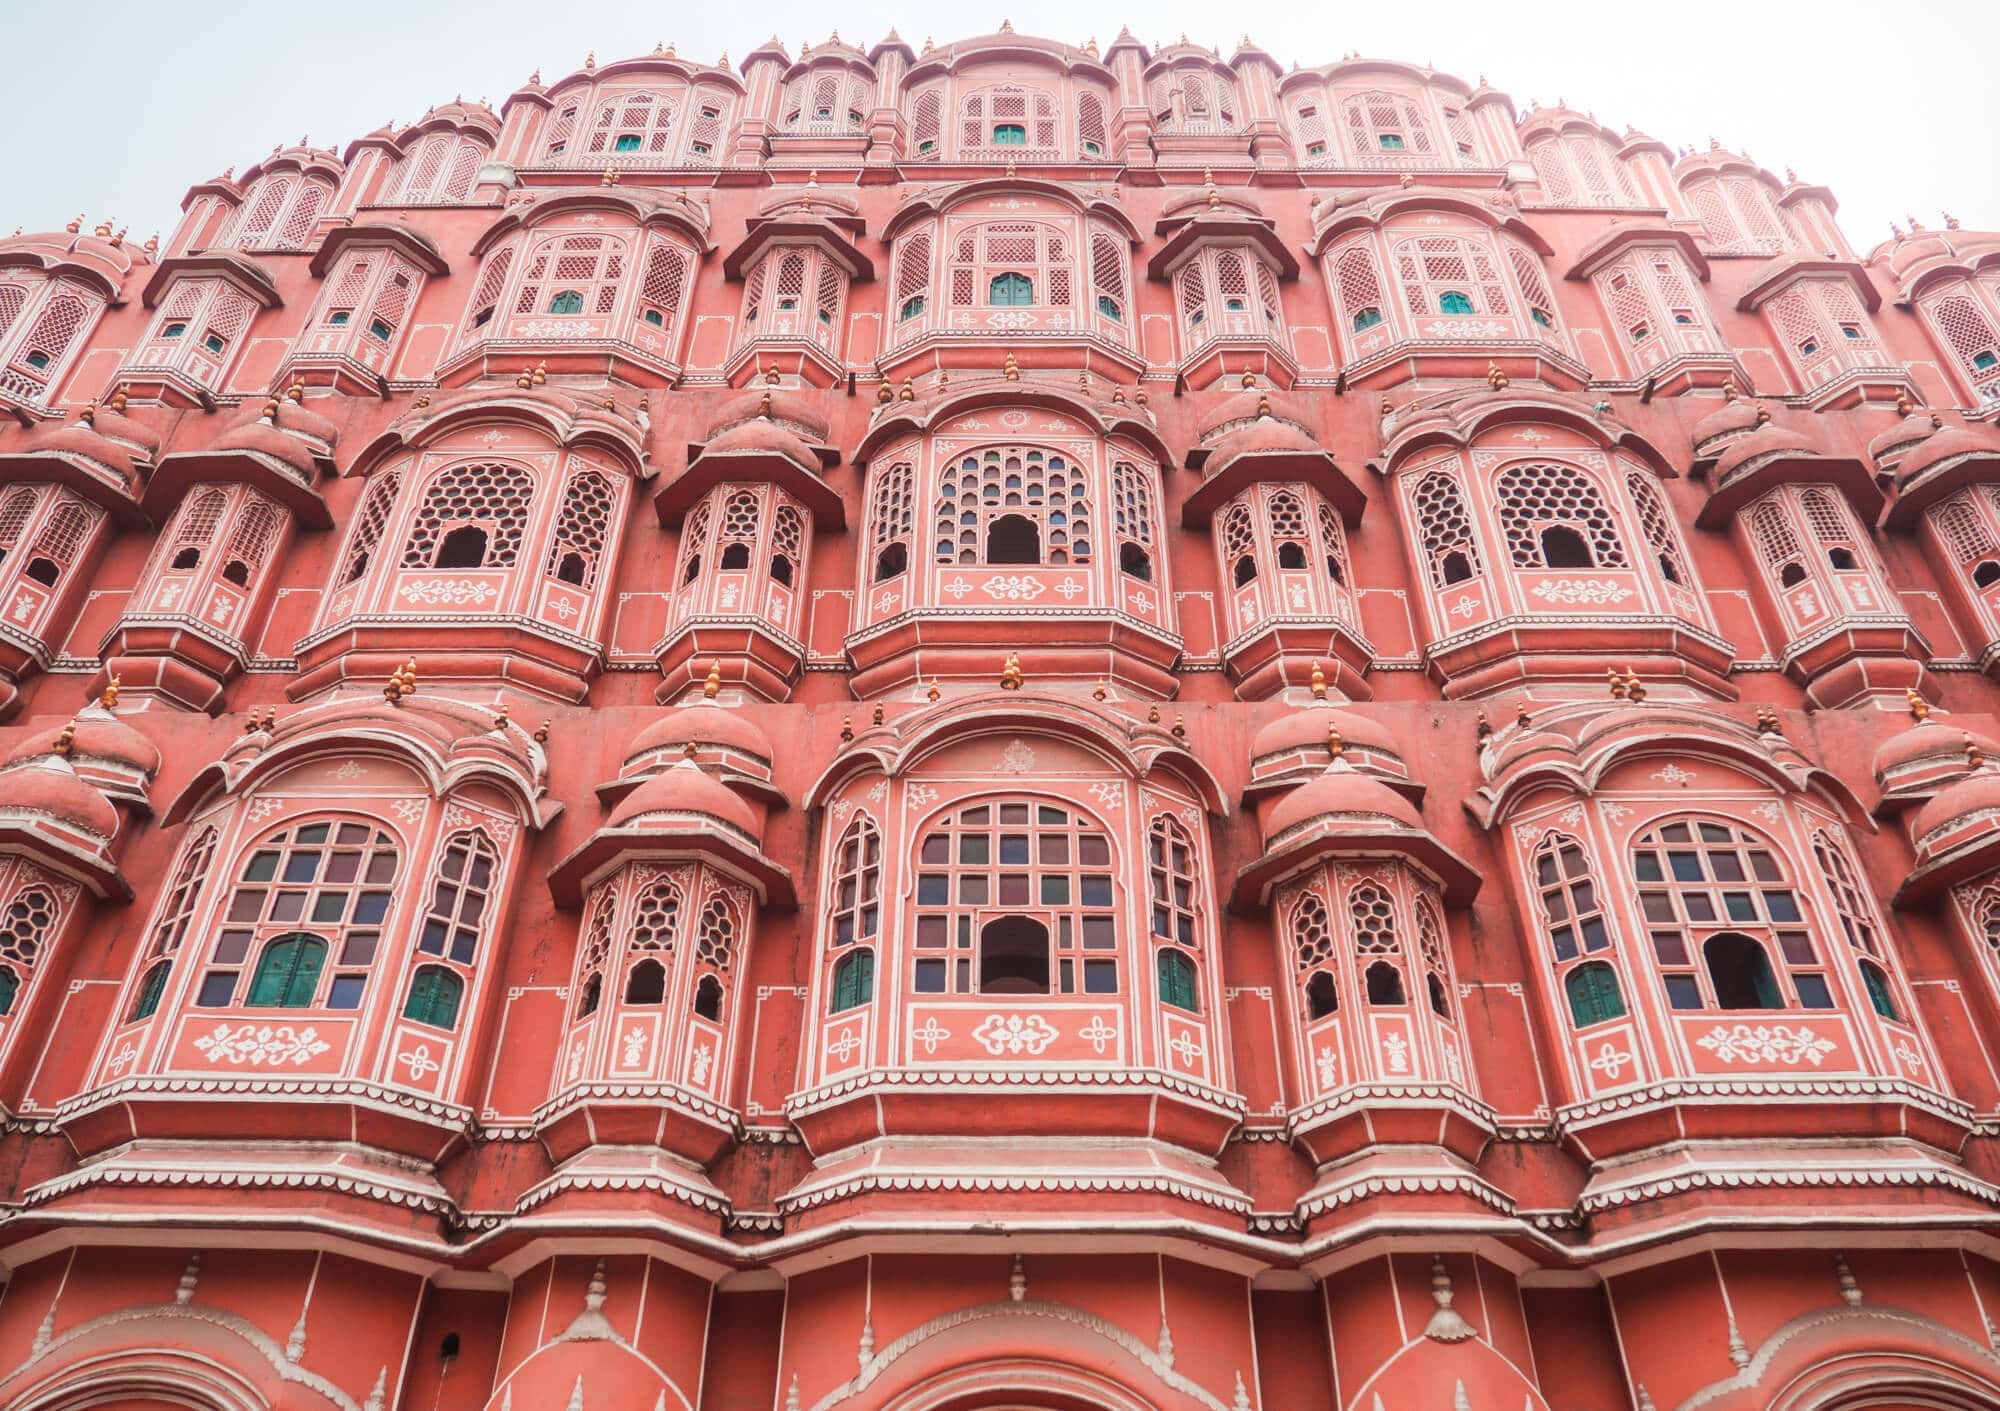 Hawa Mahal, the most stunning pink building in Jaipur, complete with 953 windows. A must on any 2-day Jaipur itinerary.